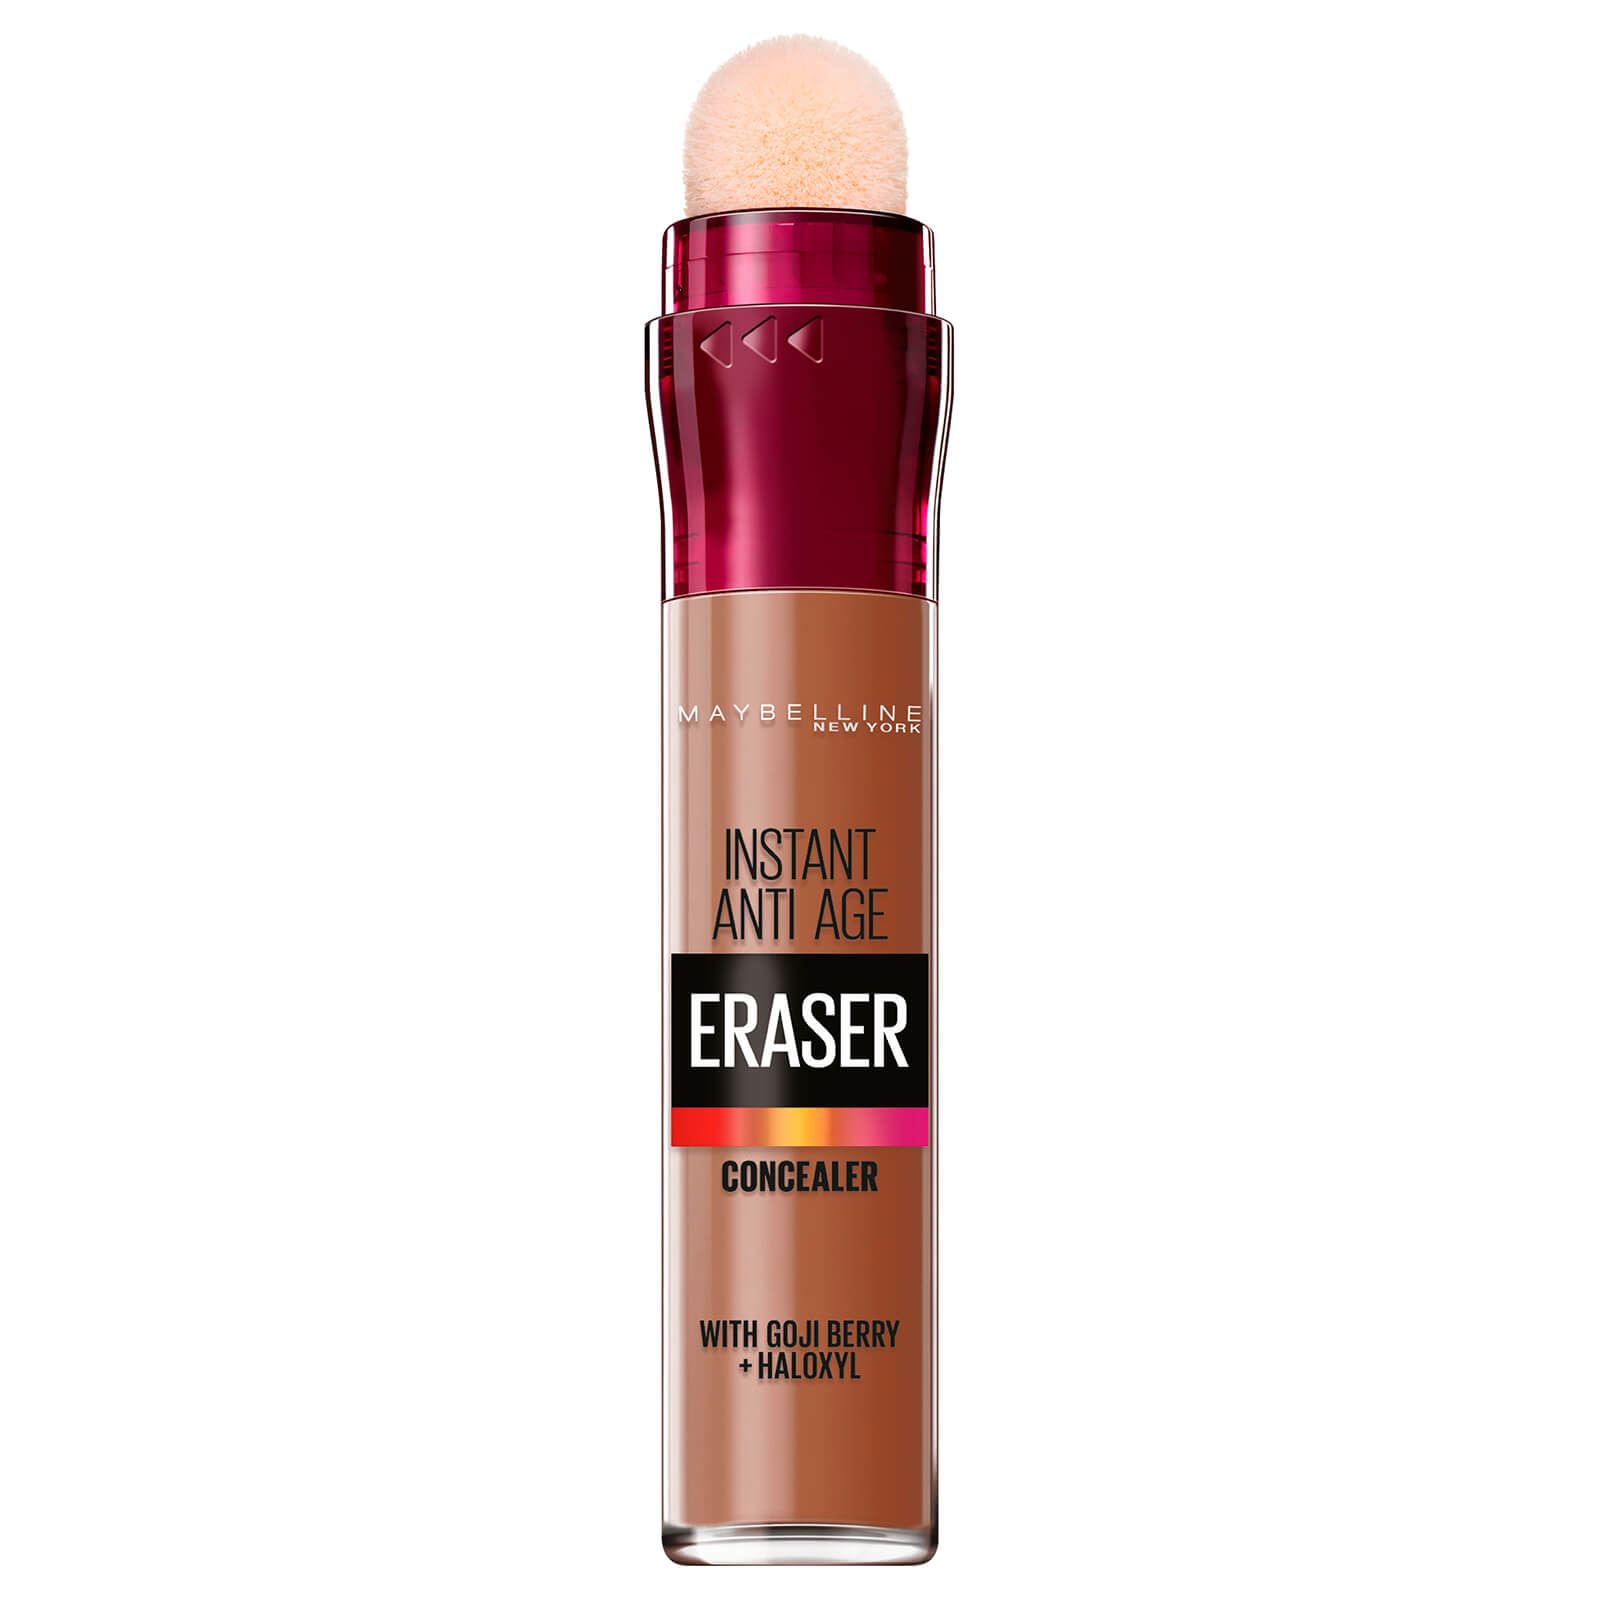 Maybelline Instant Anti Age Eraser Concealer 6.8ml (Various Shades) - 2 13 Cocoa